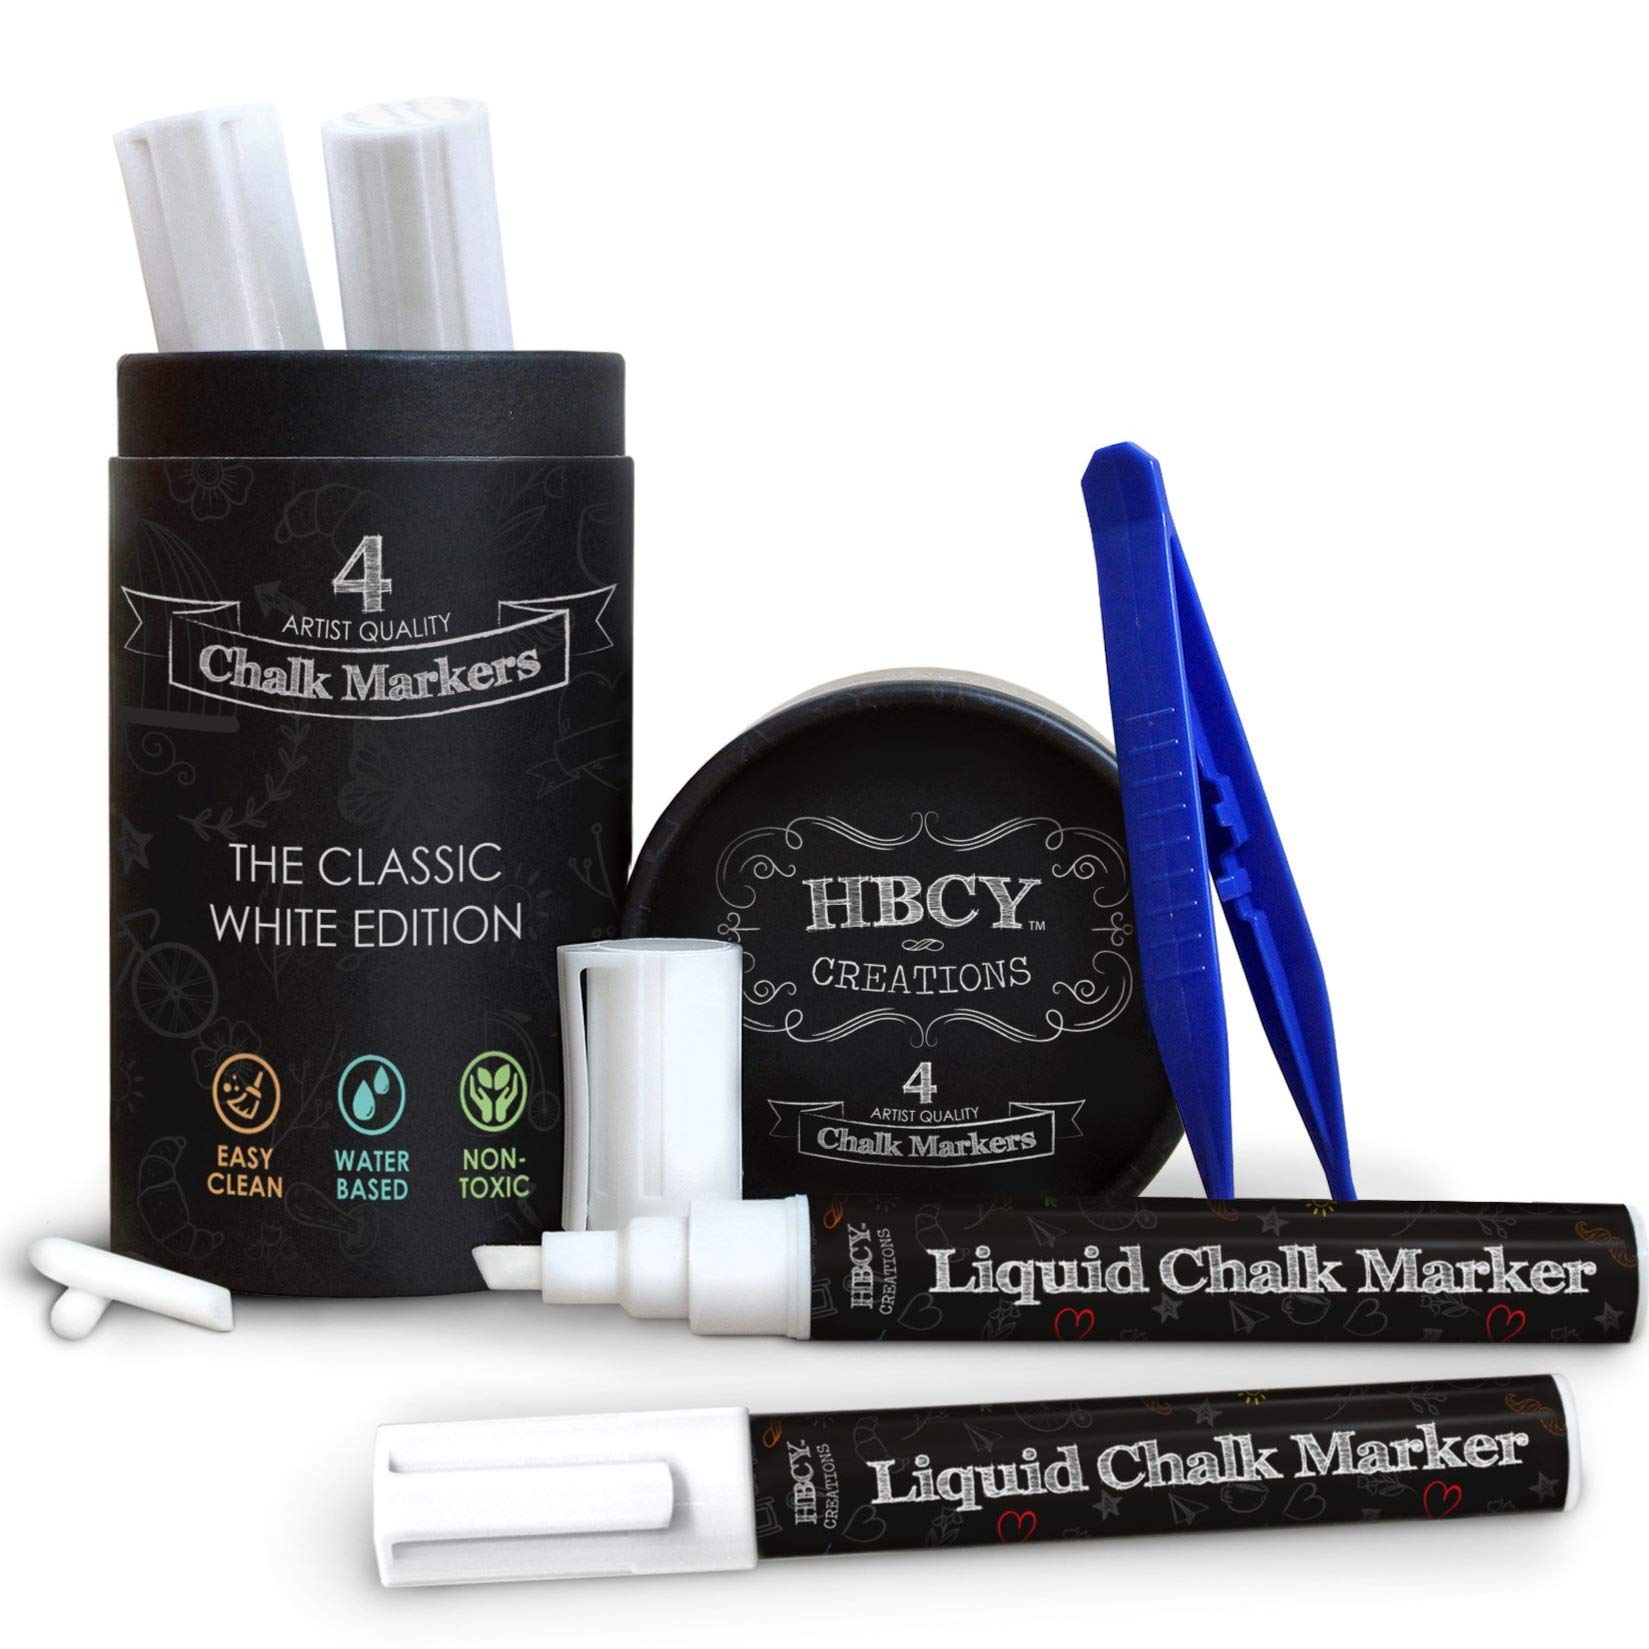 Book Cover HBCY Creations Liquid Chalk Markers Set - 4 White Non-Toxic Erasable Chalkboard Markers - For Chalk Boards, Glass, Labels & Car Windows! 2 Extra Chisel & Bullet Tips, Tweezers & Chalk Pen Holder! Classic White Edition 4 Count (Pack of 1)